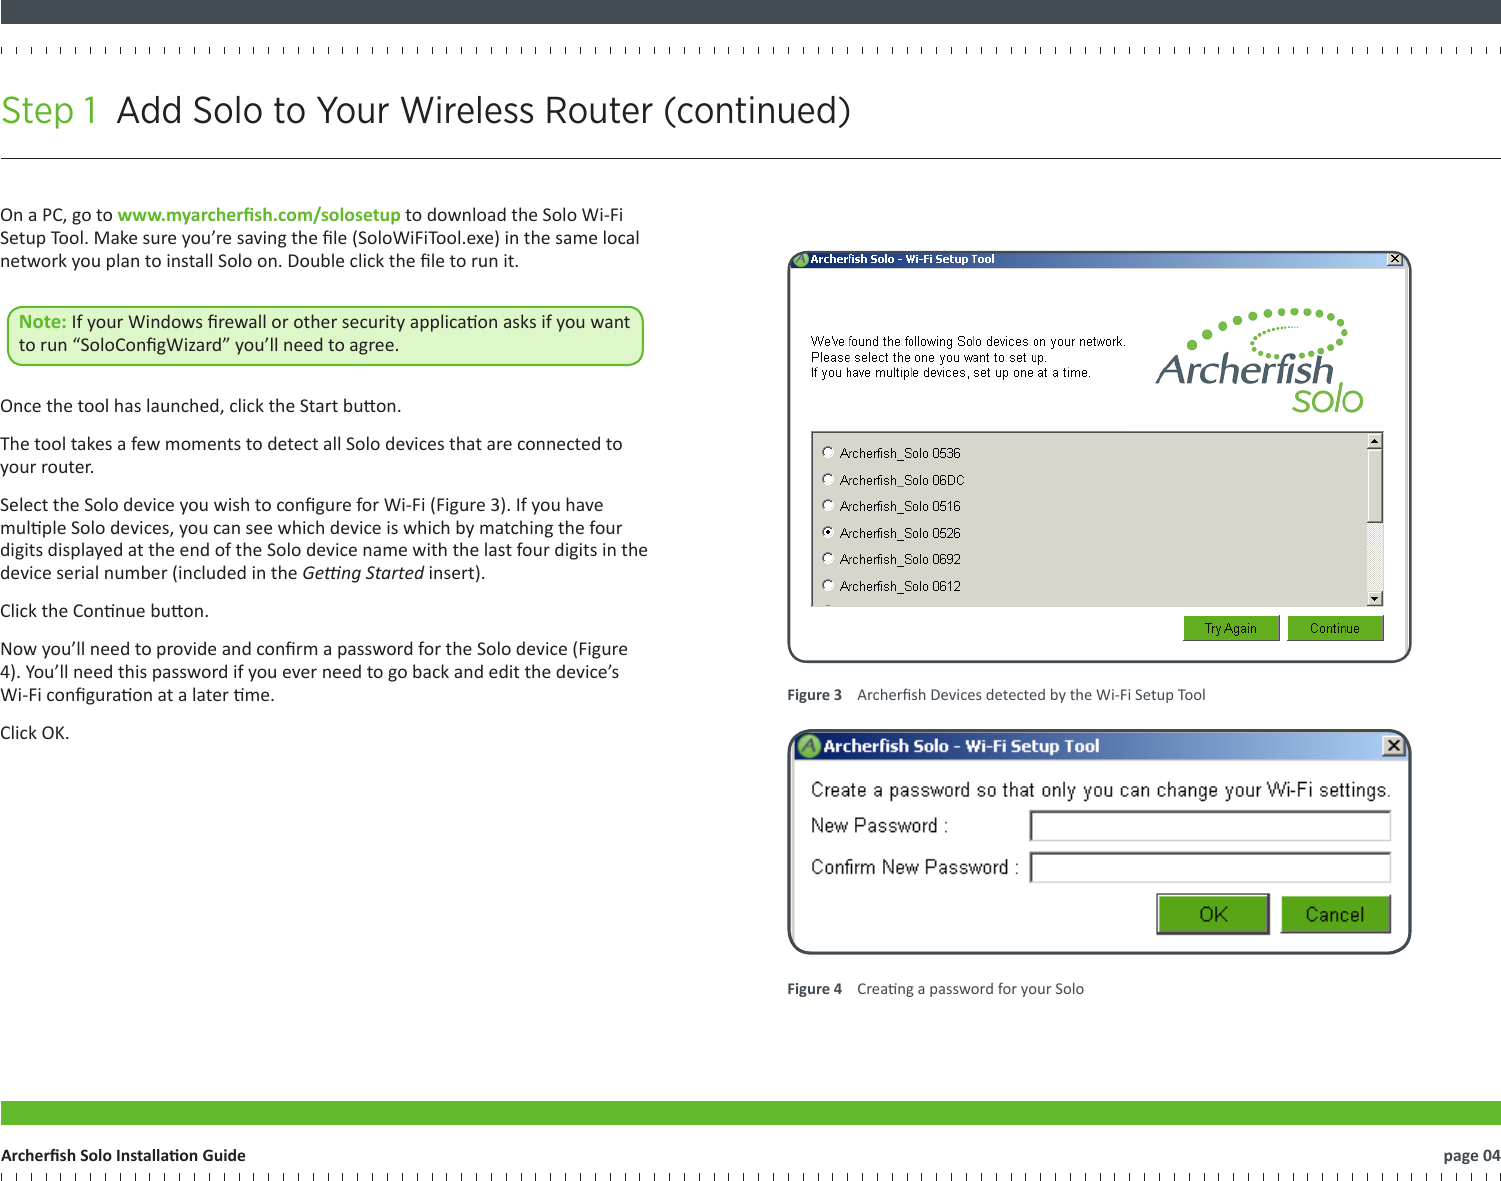 Step 1  Add Solo to Your Wireless Router (continued)   page 04Archersh Solo Installaon GuideFigure 3    Archersh Devices detected by the Wi-Fi Setup ToolFigure 4    Creang a password for your SoloOn a PC, go to www.myarchersh.com/solosetup to download the Solo Wi-Fi Setup Tool. Make sure you’re saving the le (SoloWiFiTool.exe) in the same local network you plan to install Solo on. Double click the le to run it. Note: If your Windows rewall or other security applicaon asks if you want to run “SoloCongWizard” you’ll need to agree.  Once the tool has launched, click the Start buon.The tool takes a few moments to detect all Solo devices that are connected to your router.Select the Solo device you wish to congure for Wi-Fi (Figure 3). If you have mulple Solo devices, you can see which device is which by matching the four digits displayed at the end of the Solo device name with the last four digits in the device serial number (included in the Geng Started insert).Click the Connue buon.Now you’ll need to provide and conrm a password for the Solo device (Figure 4). You’ll need this password if you ever need to go back and edit the device’s Wi-Fi conguraon at a later me.Click OK.